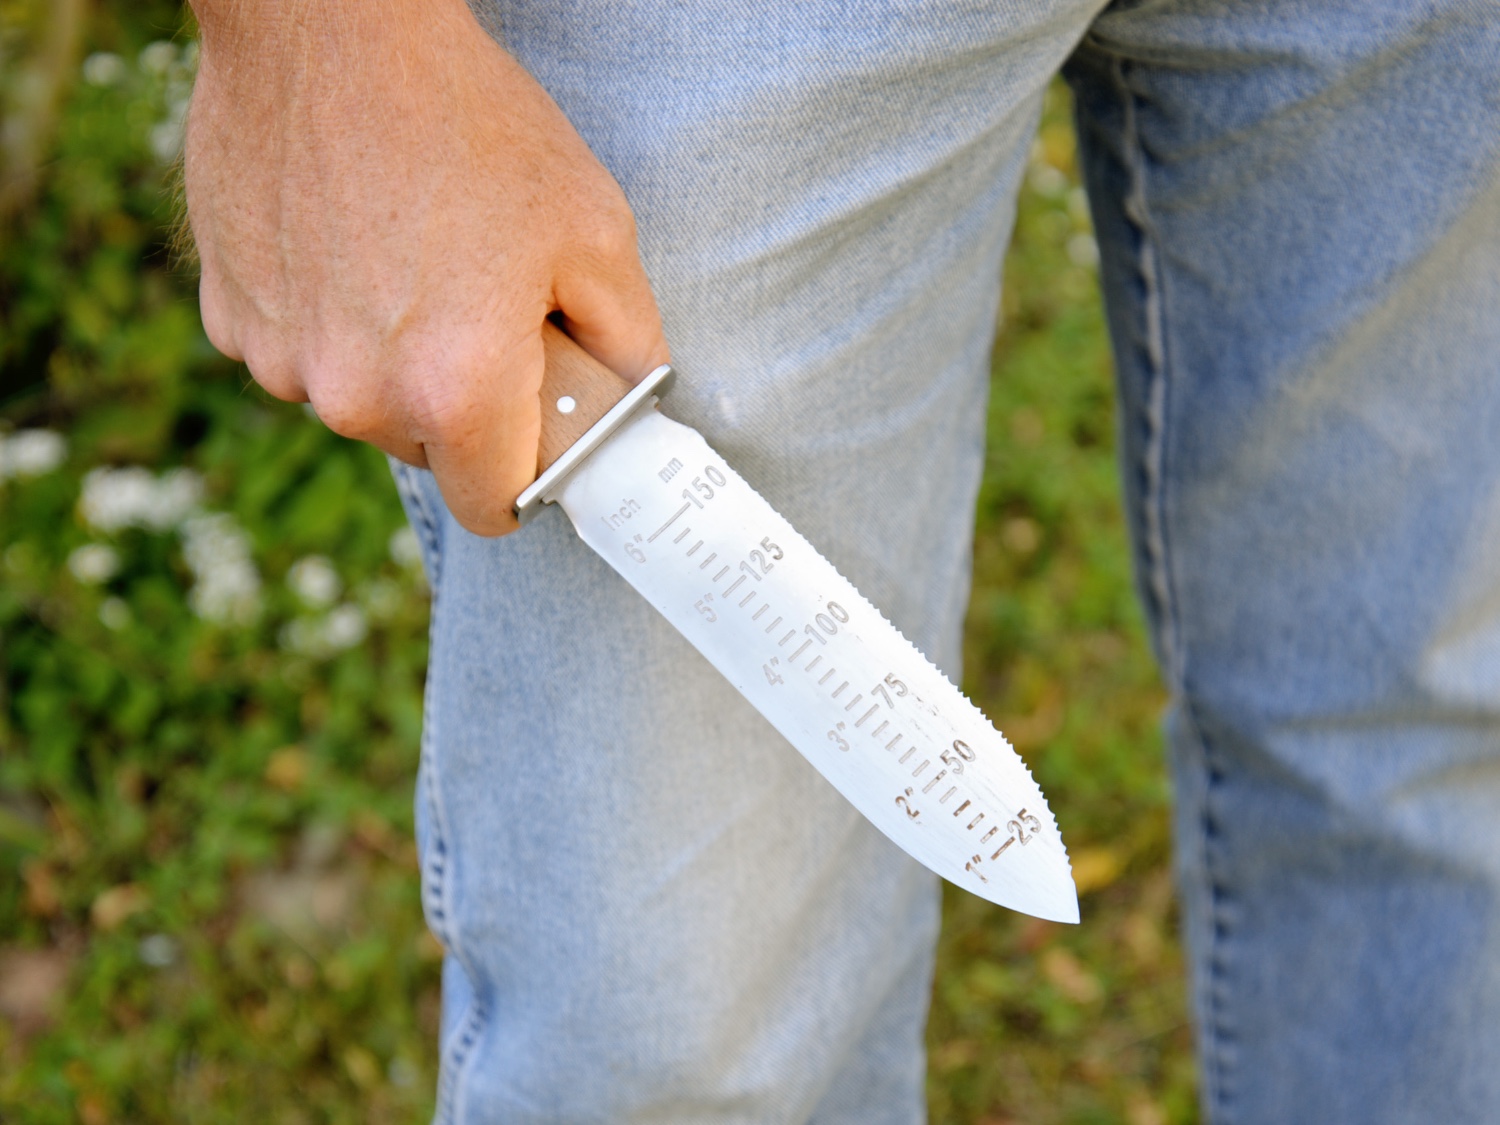 A person holding the Truly Garden hori hori knife next to their leg to show its depth gauge.